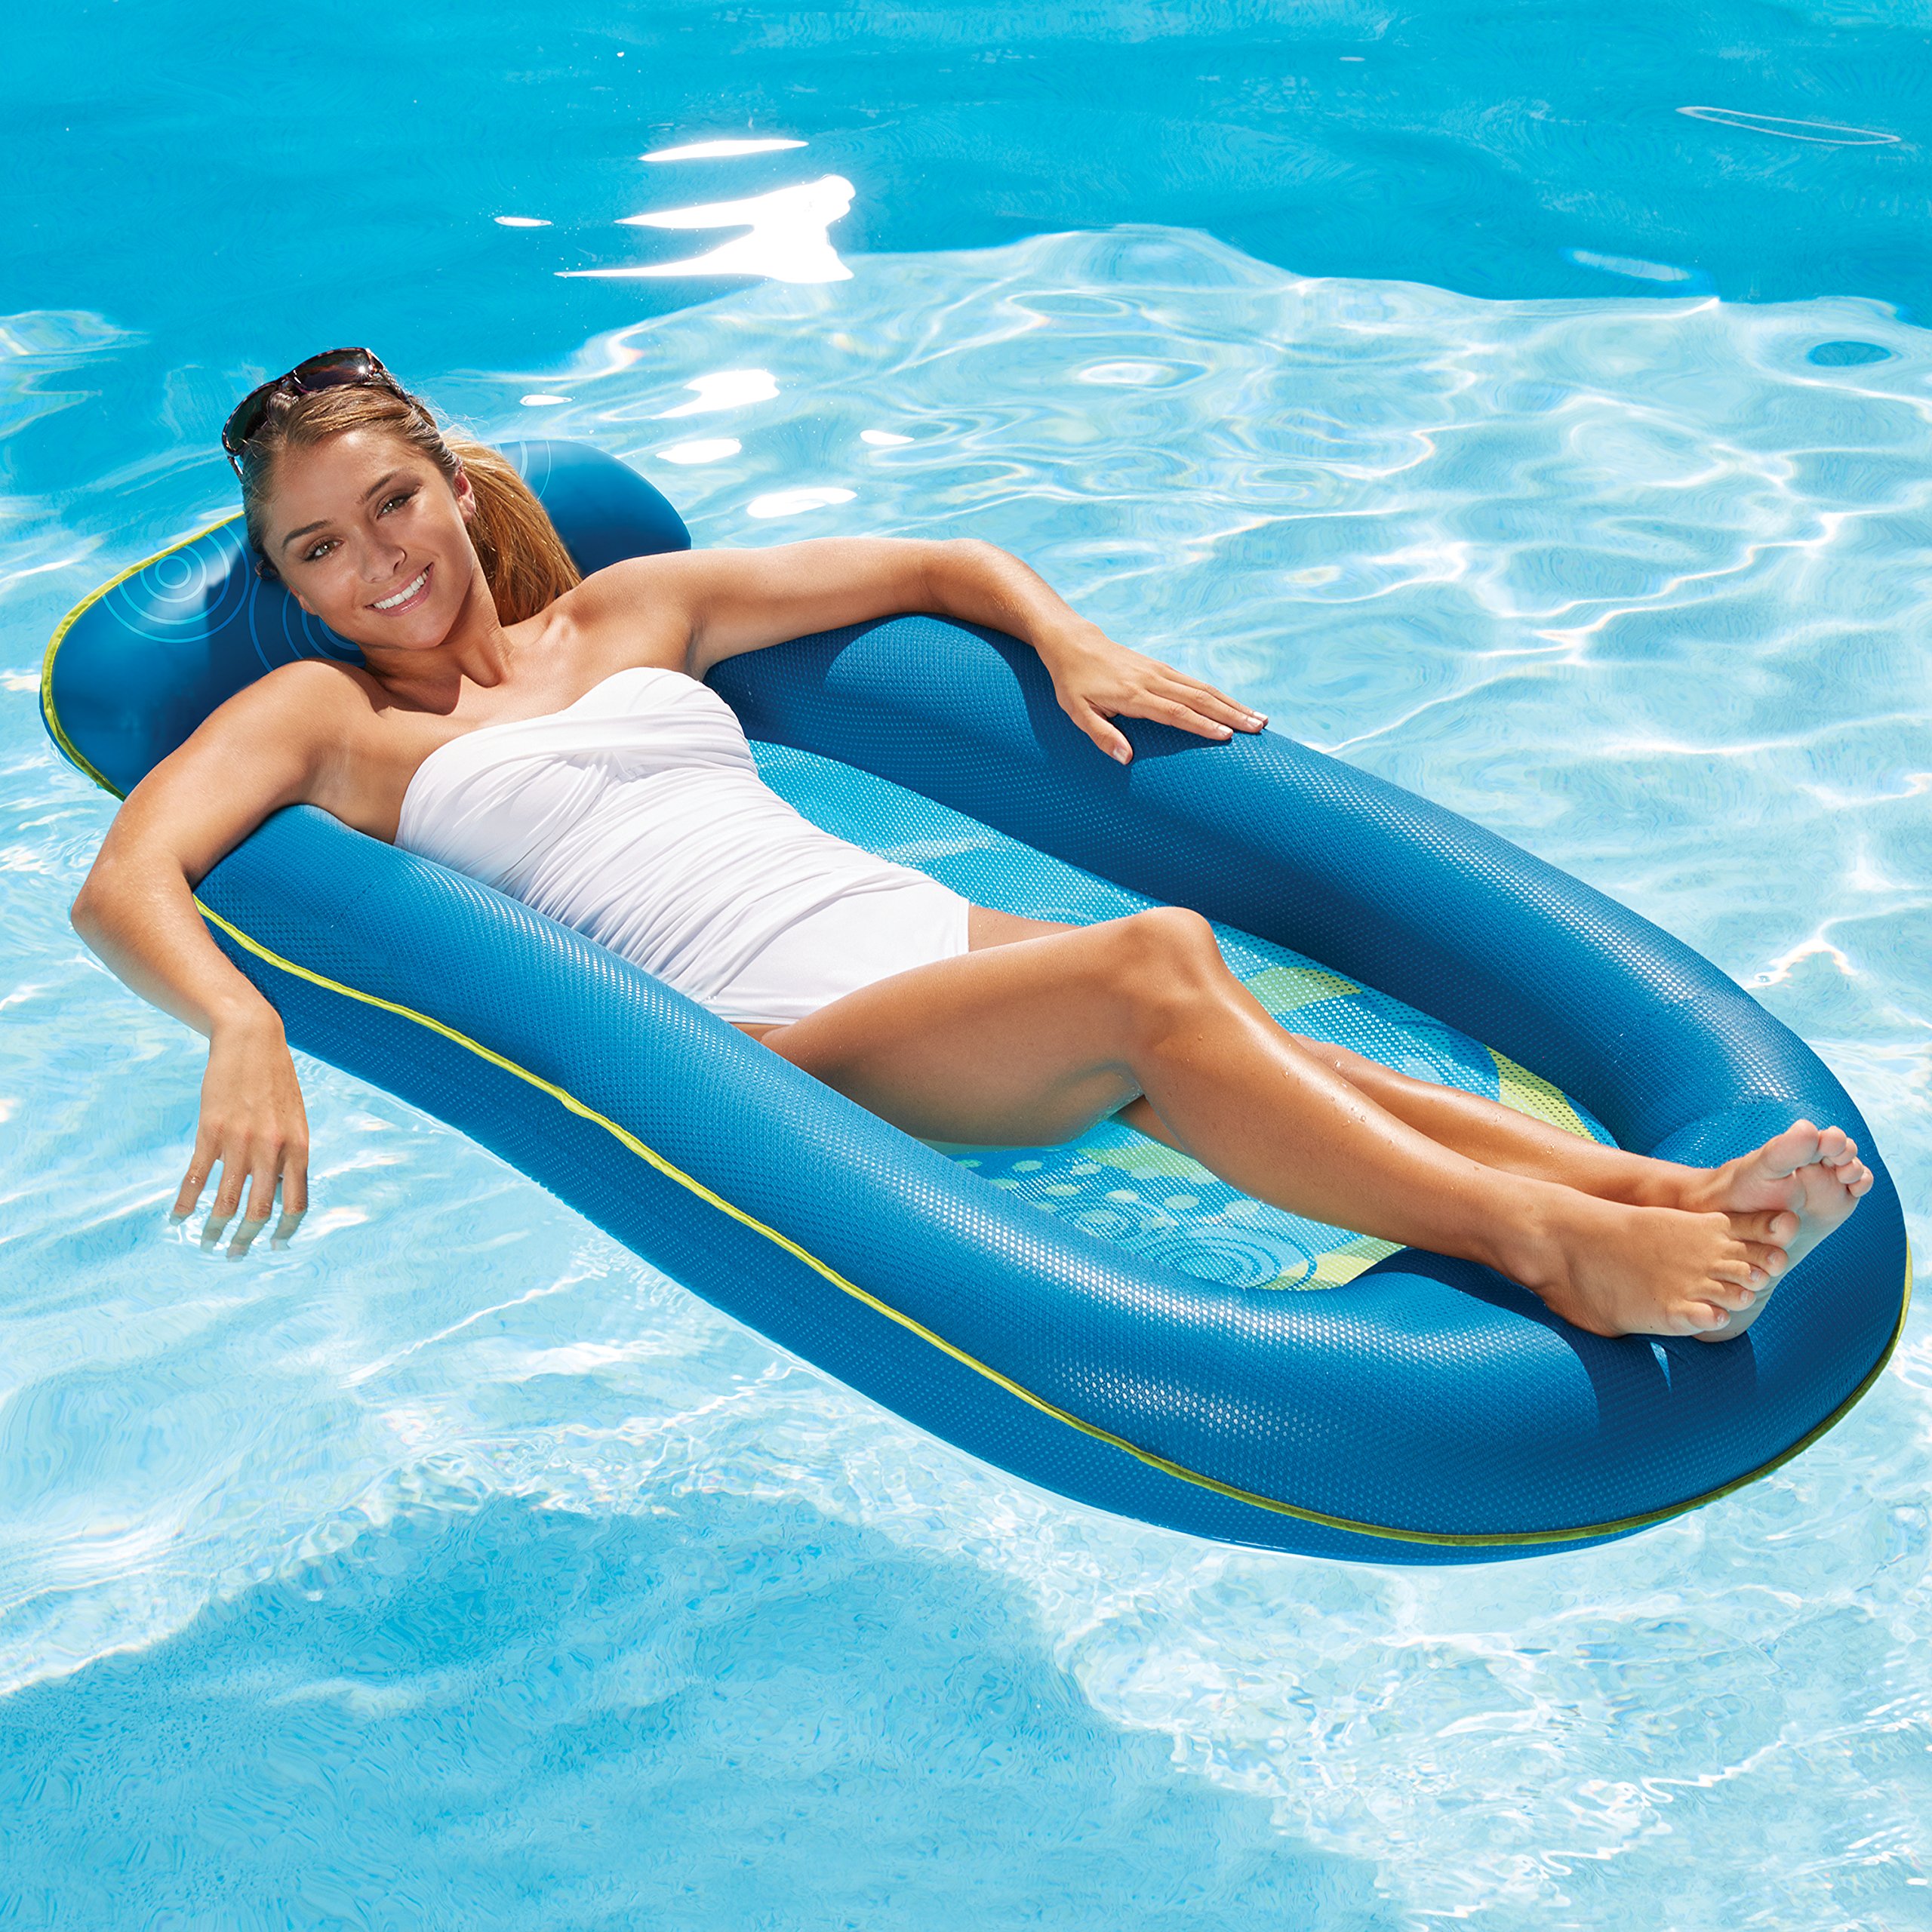 Aqua Comfort Pool Float Lounge – Inflatable Pool Floats for Adults with Headrest and Footrest – Bubble Waves